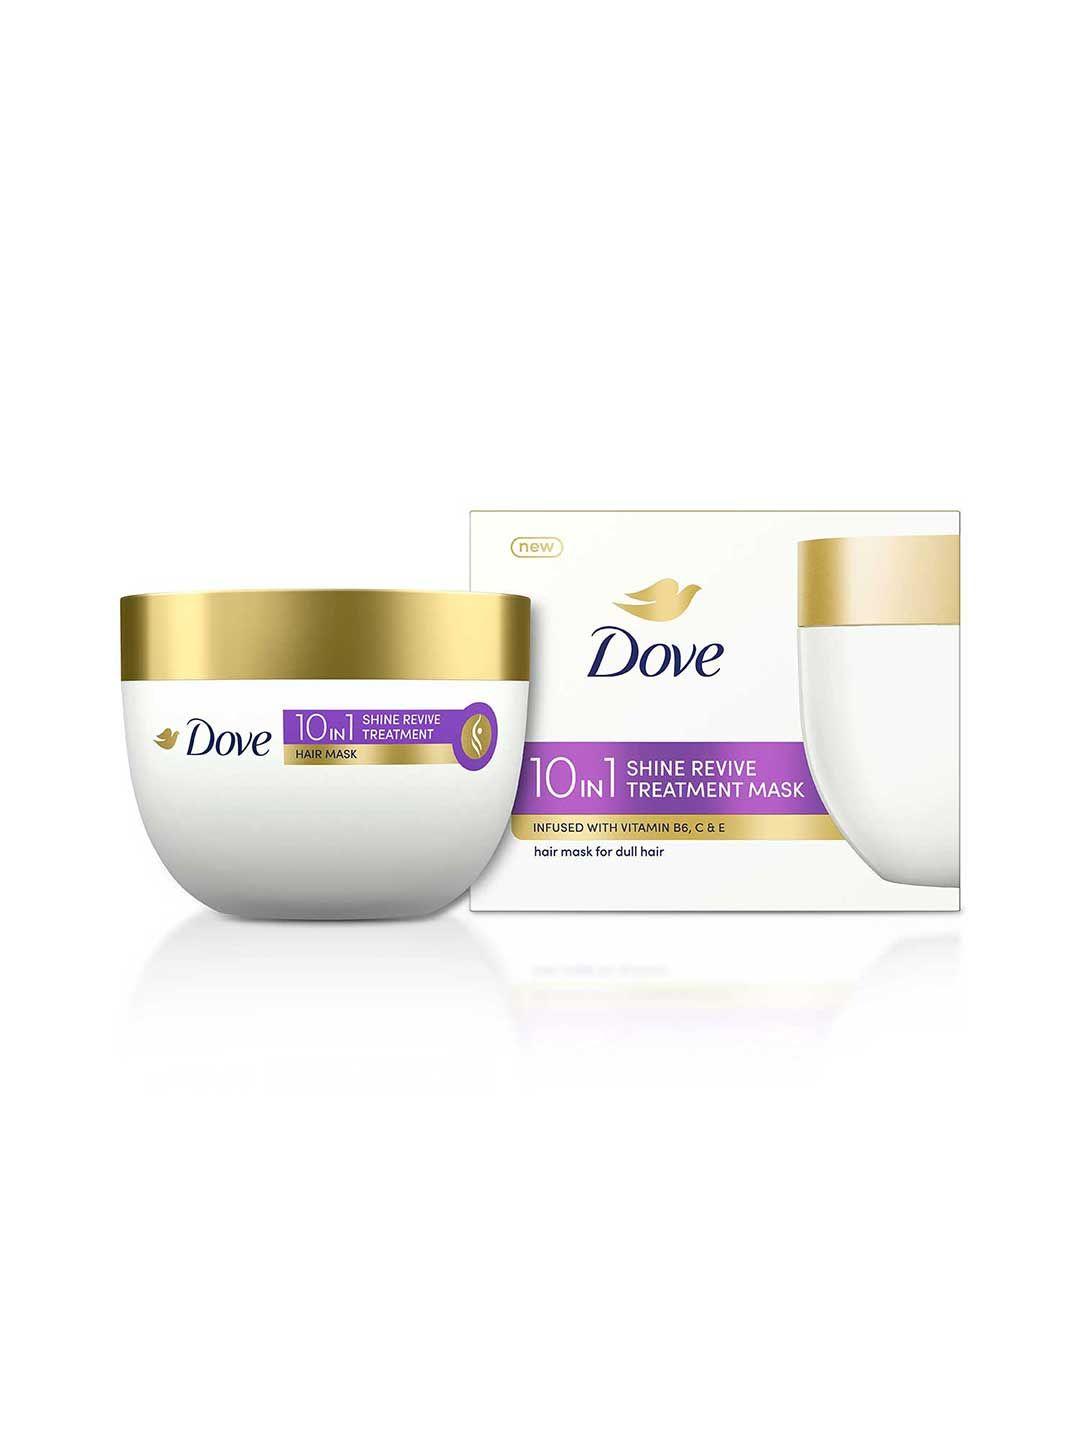 dove 10-in-1 shine revive treatment hair mask with vitamins b6 & e for dull hair - 300ml